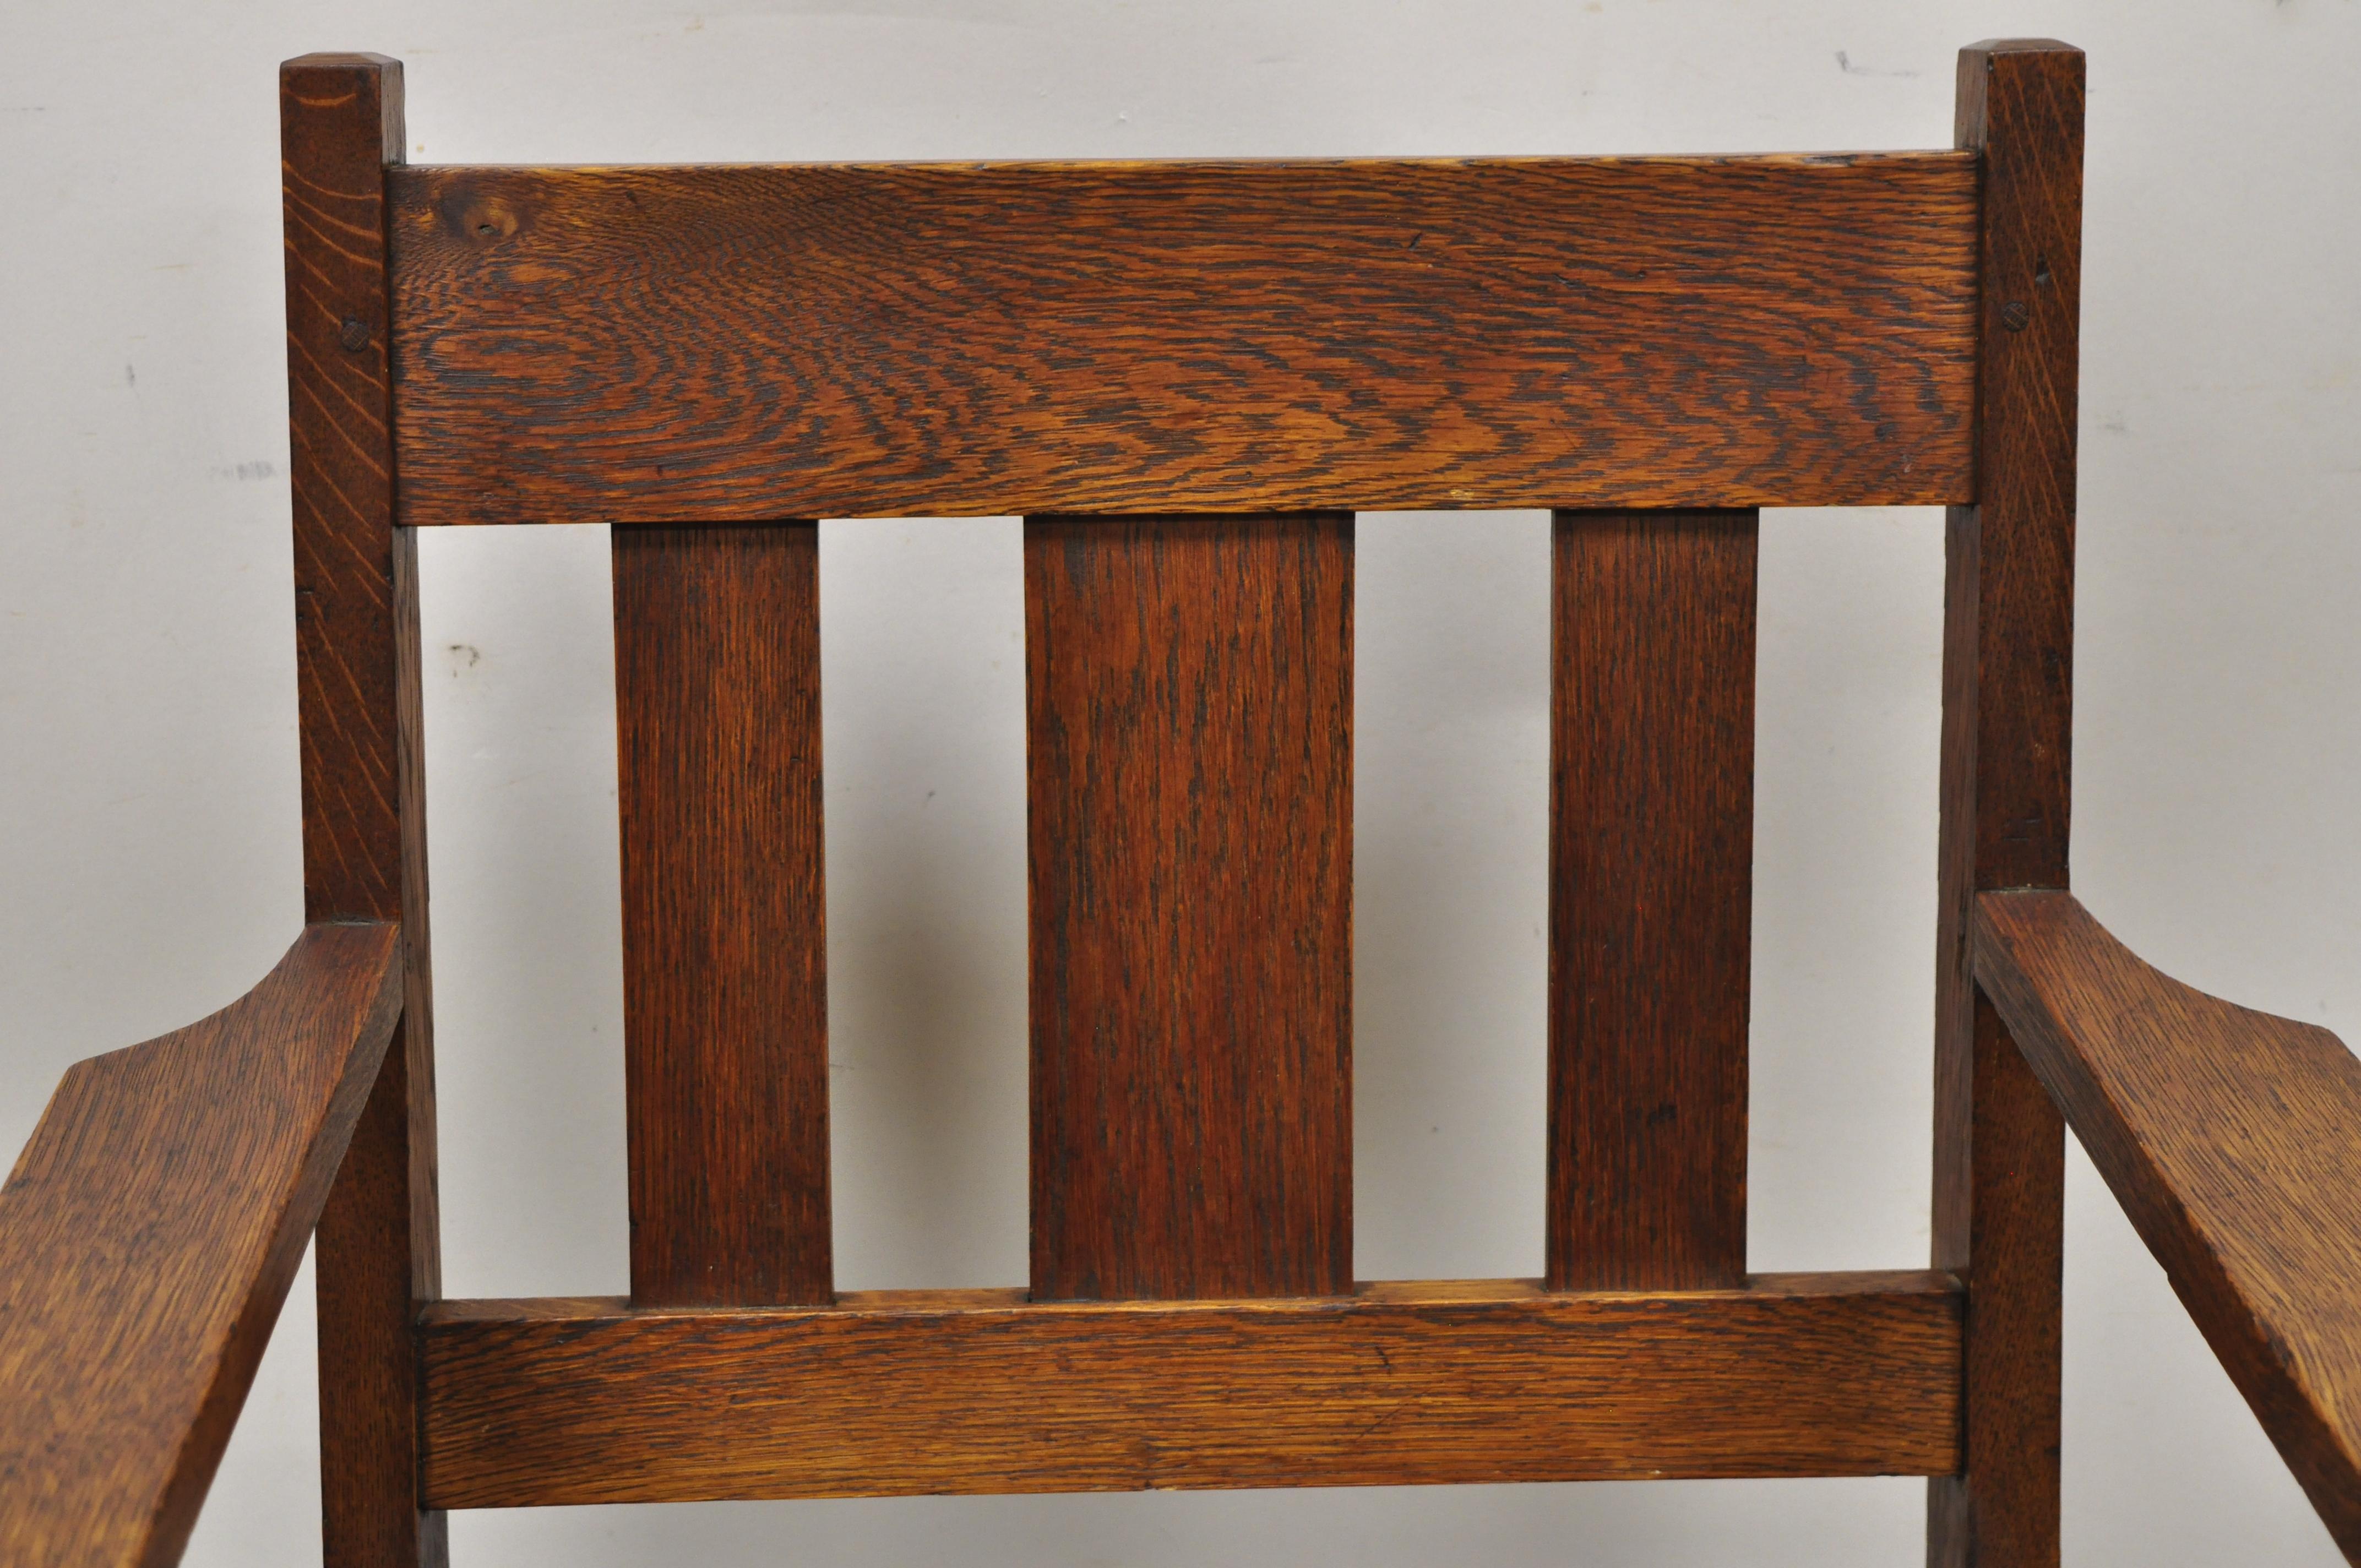 Antique mission oak Arts & Crafts Stickley style arm chair. Item features solid wood construction, beautiful wood grain, very nice antique item, quality American craftsmanship. Circa Early 1900s. Measurements: 37